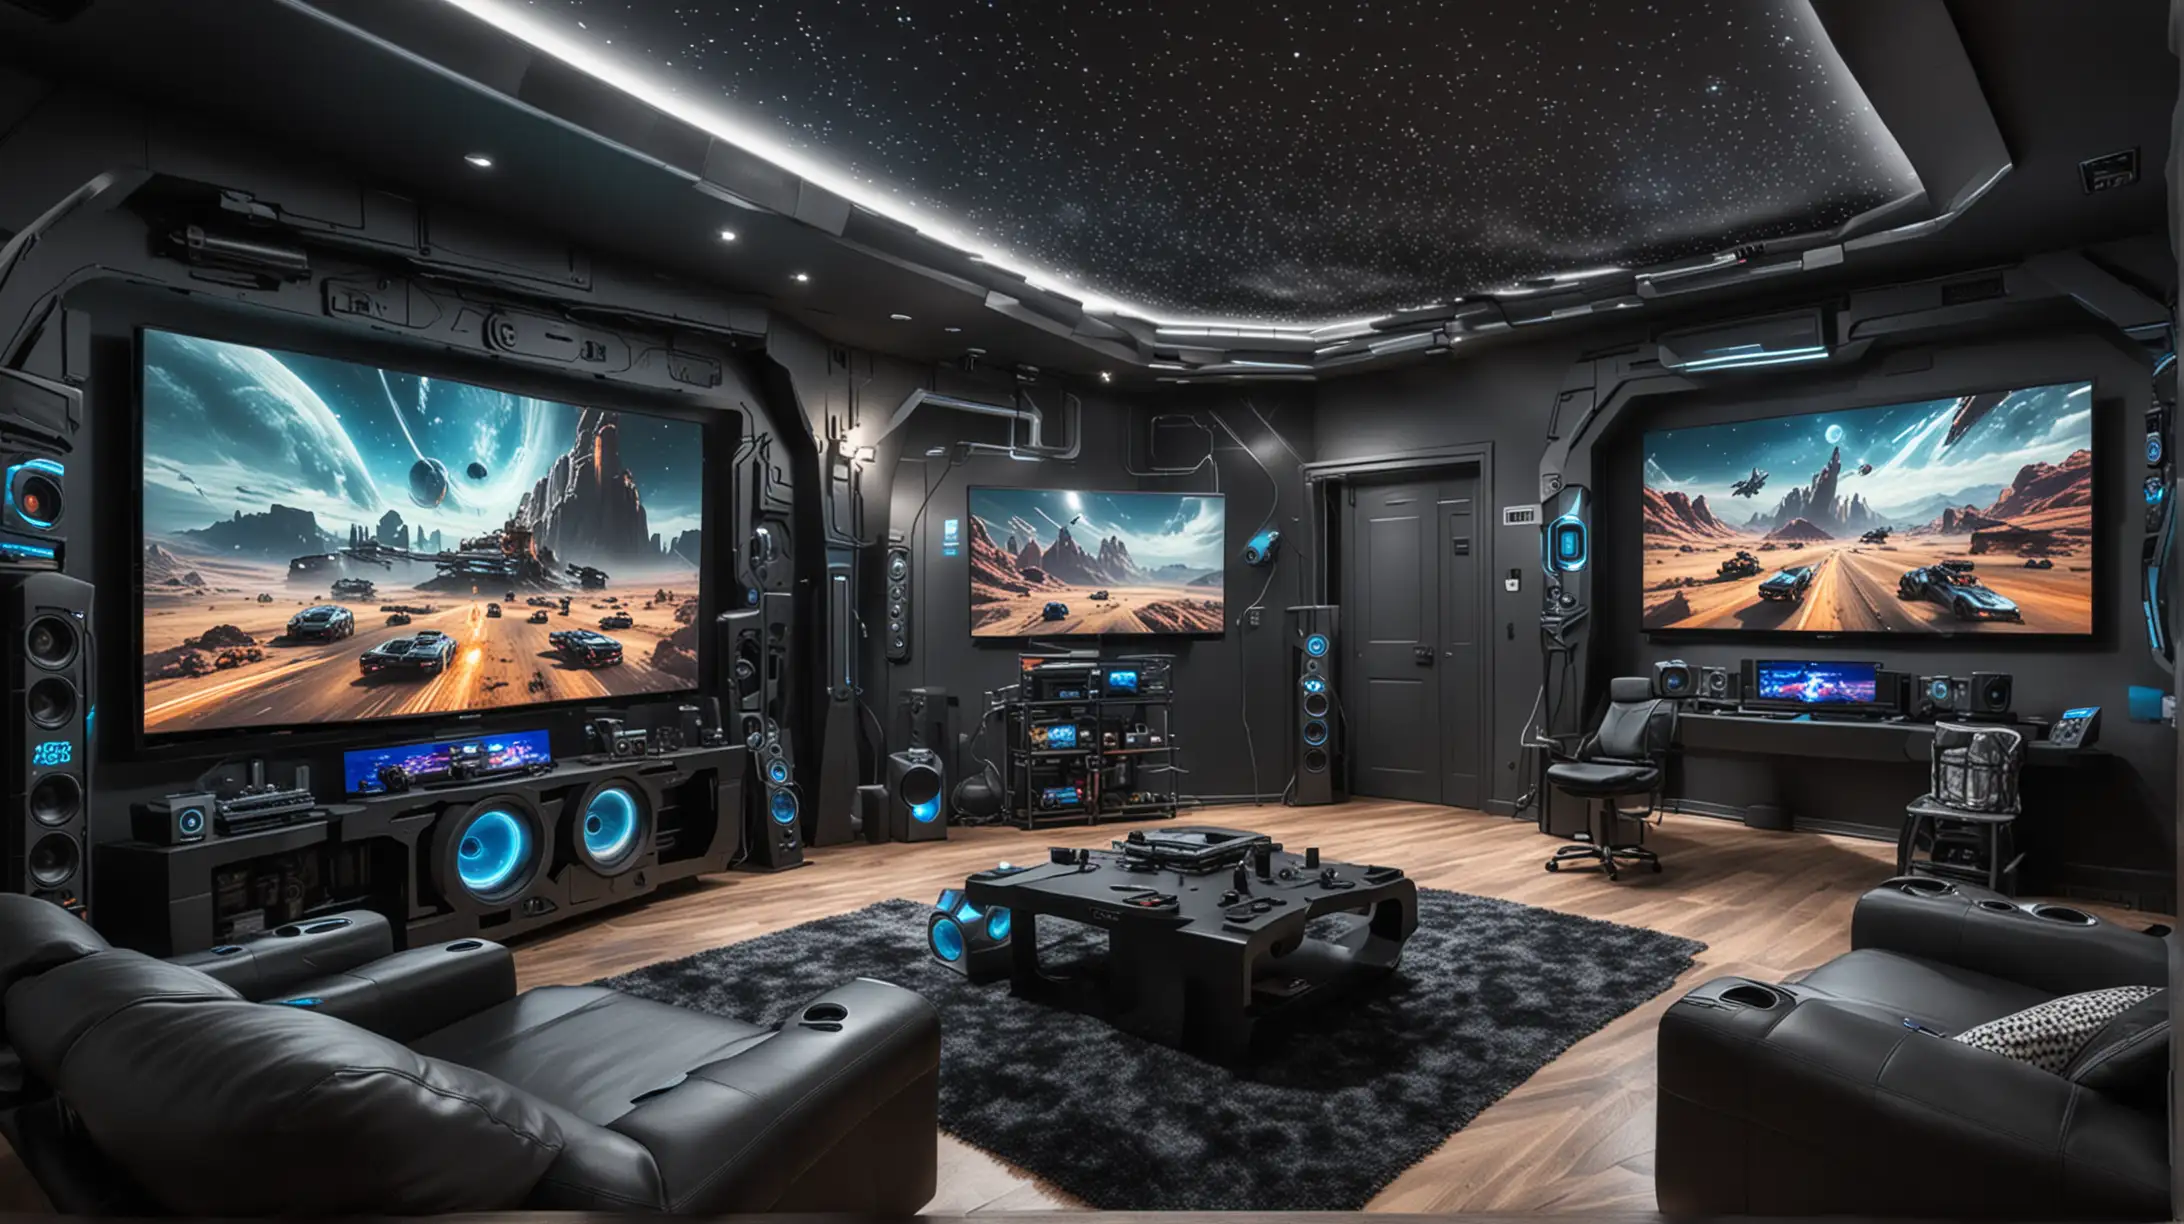 The greatest PC setup and playroom and home cinema ever for any geek and gamer with a futuristic vibe to it.